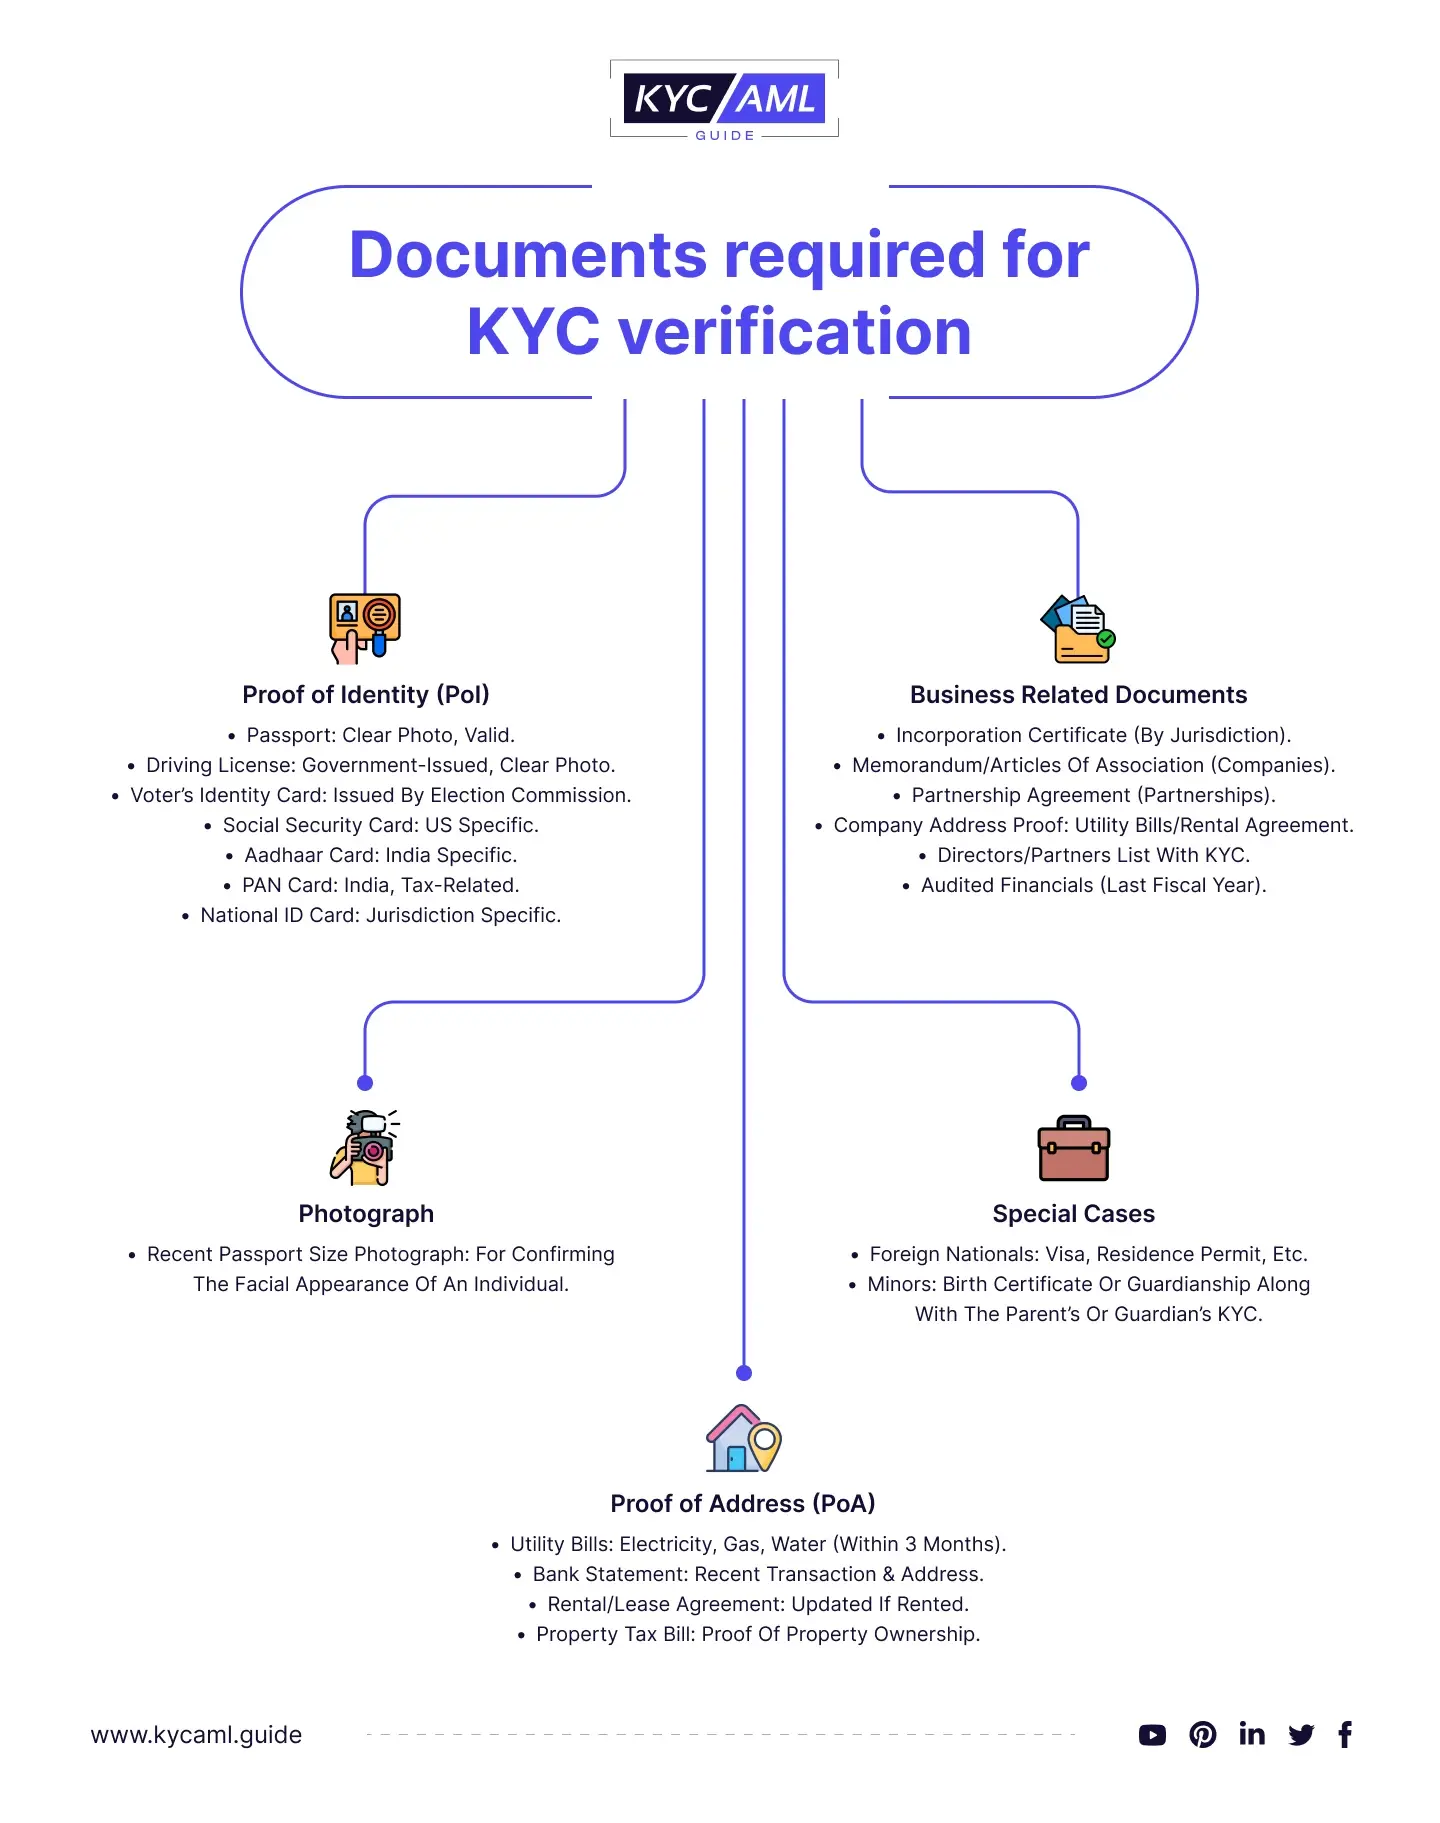 Documents required for KYC